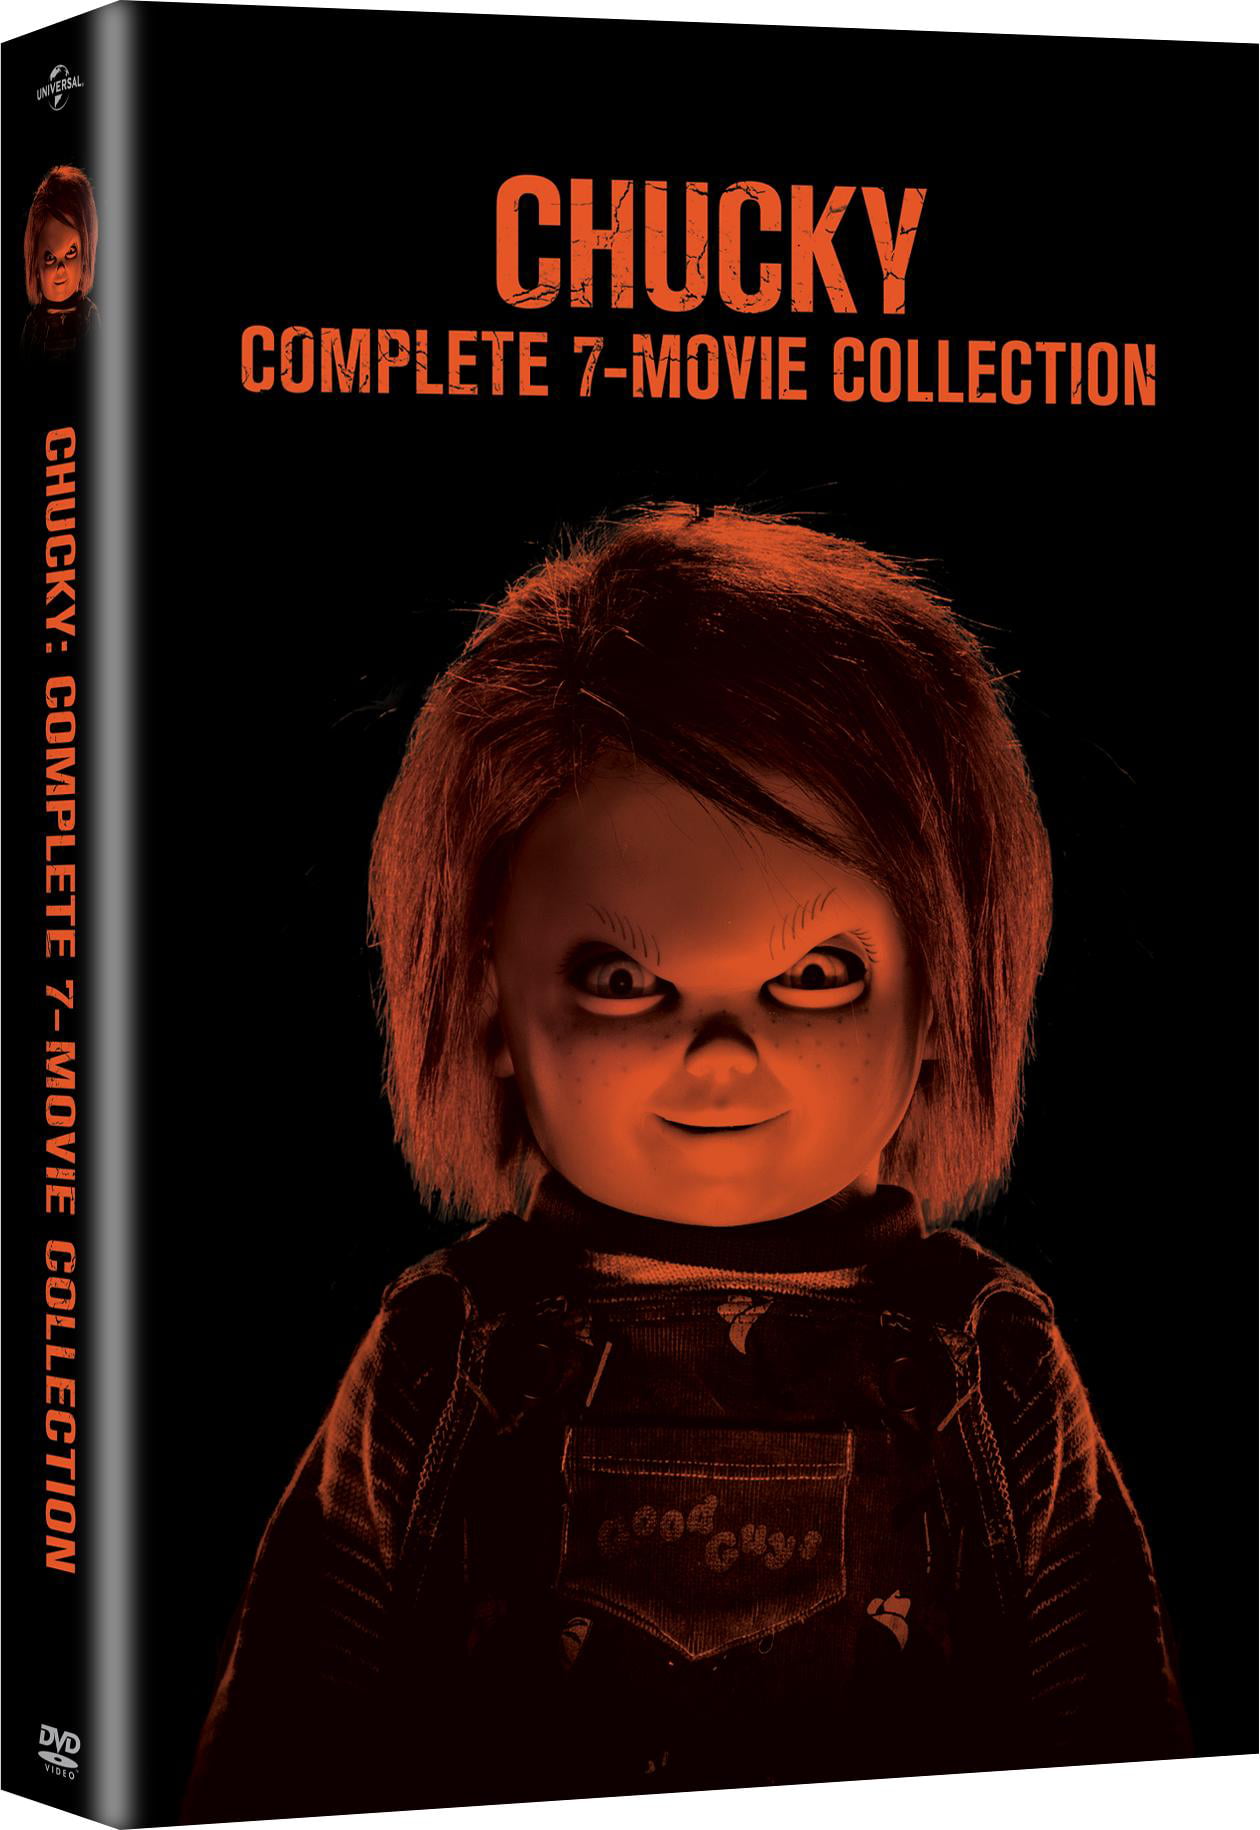 Chucky: Complete 7-Movie Collection